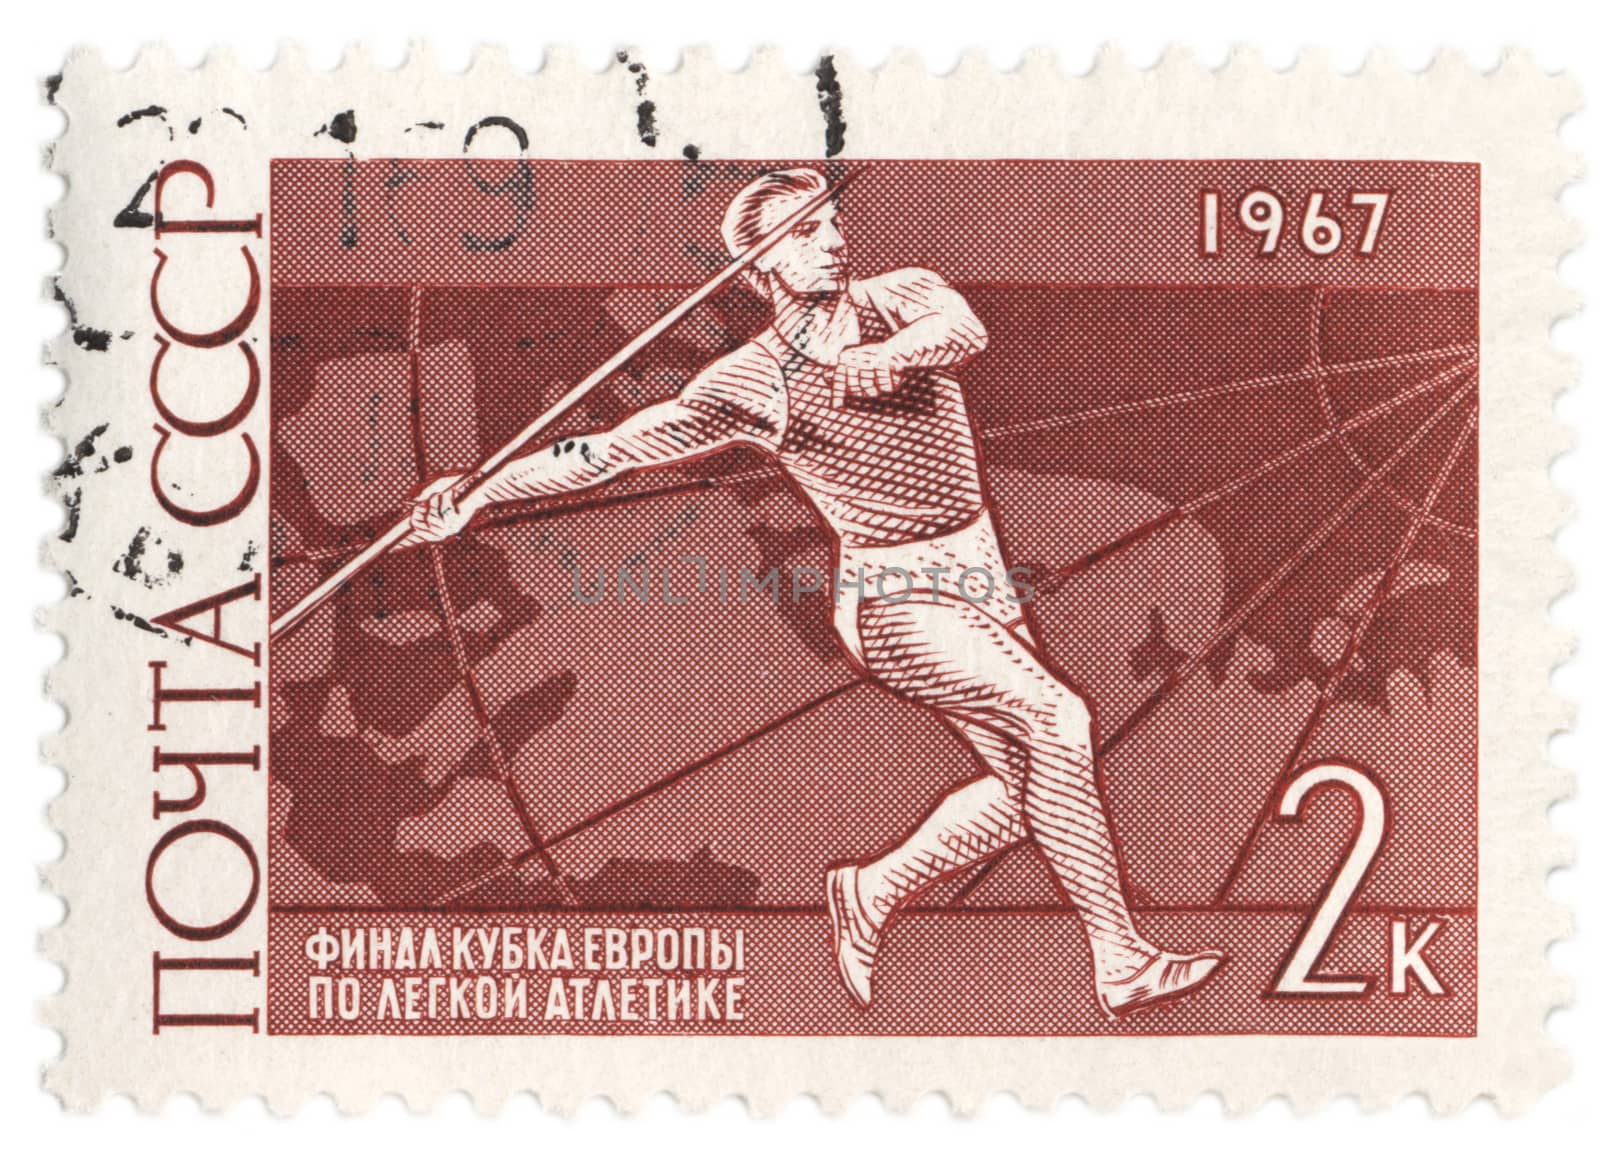 USSR - CIRCA 1967: A stamp printed in USSR shows javelin thrower, devoted to the Finals of the European Cup in Athletics, circa 1967